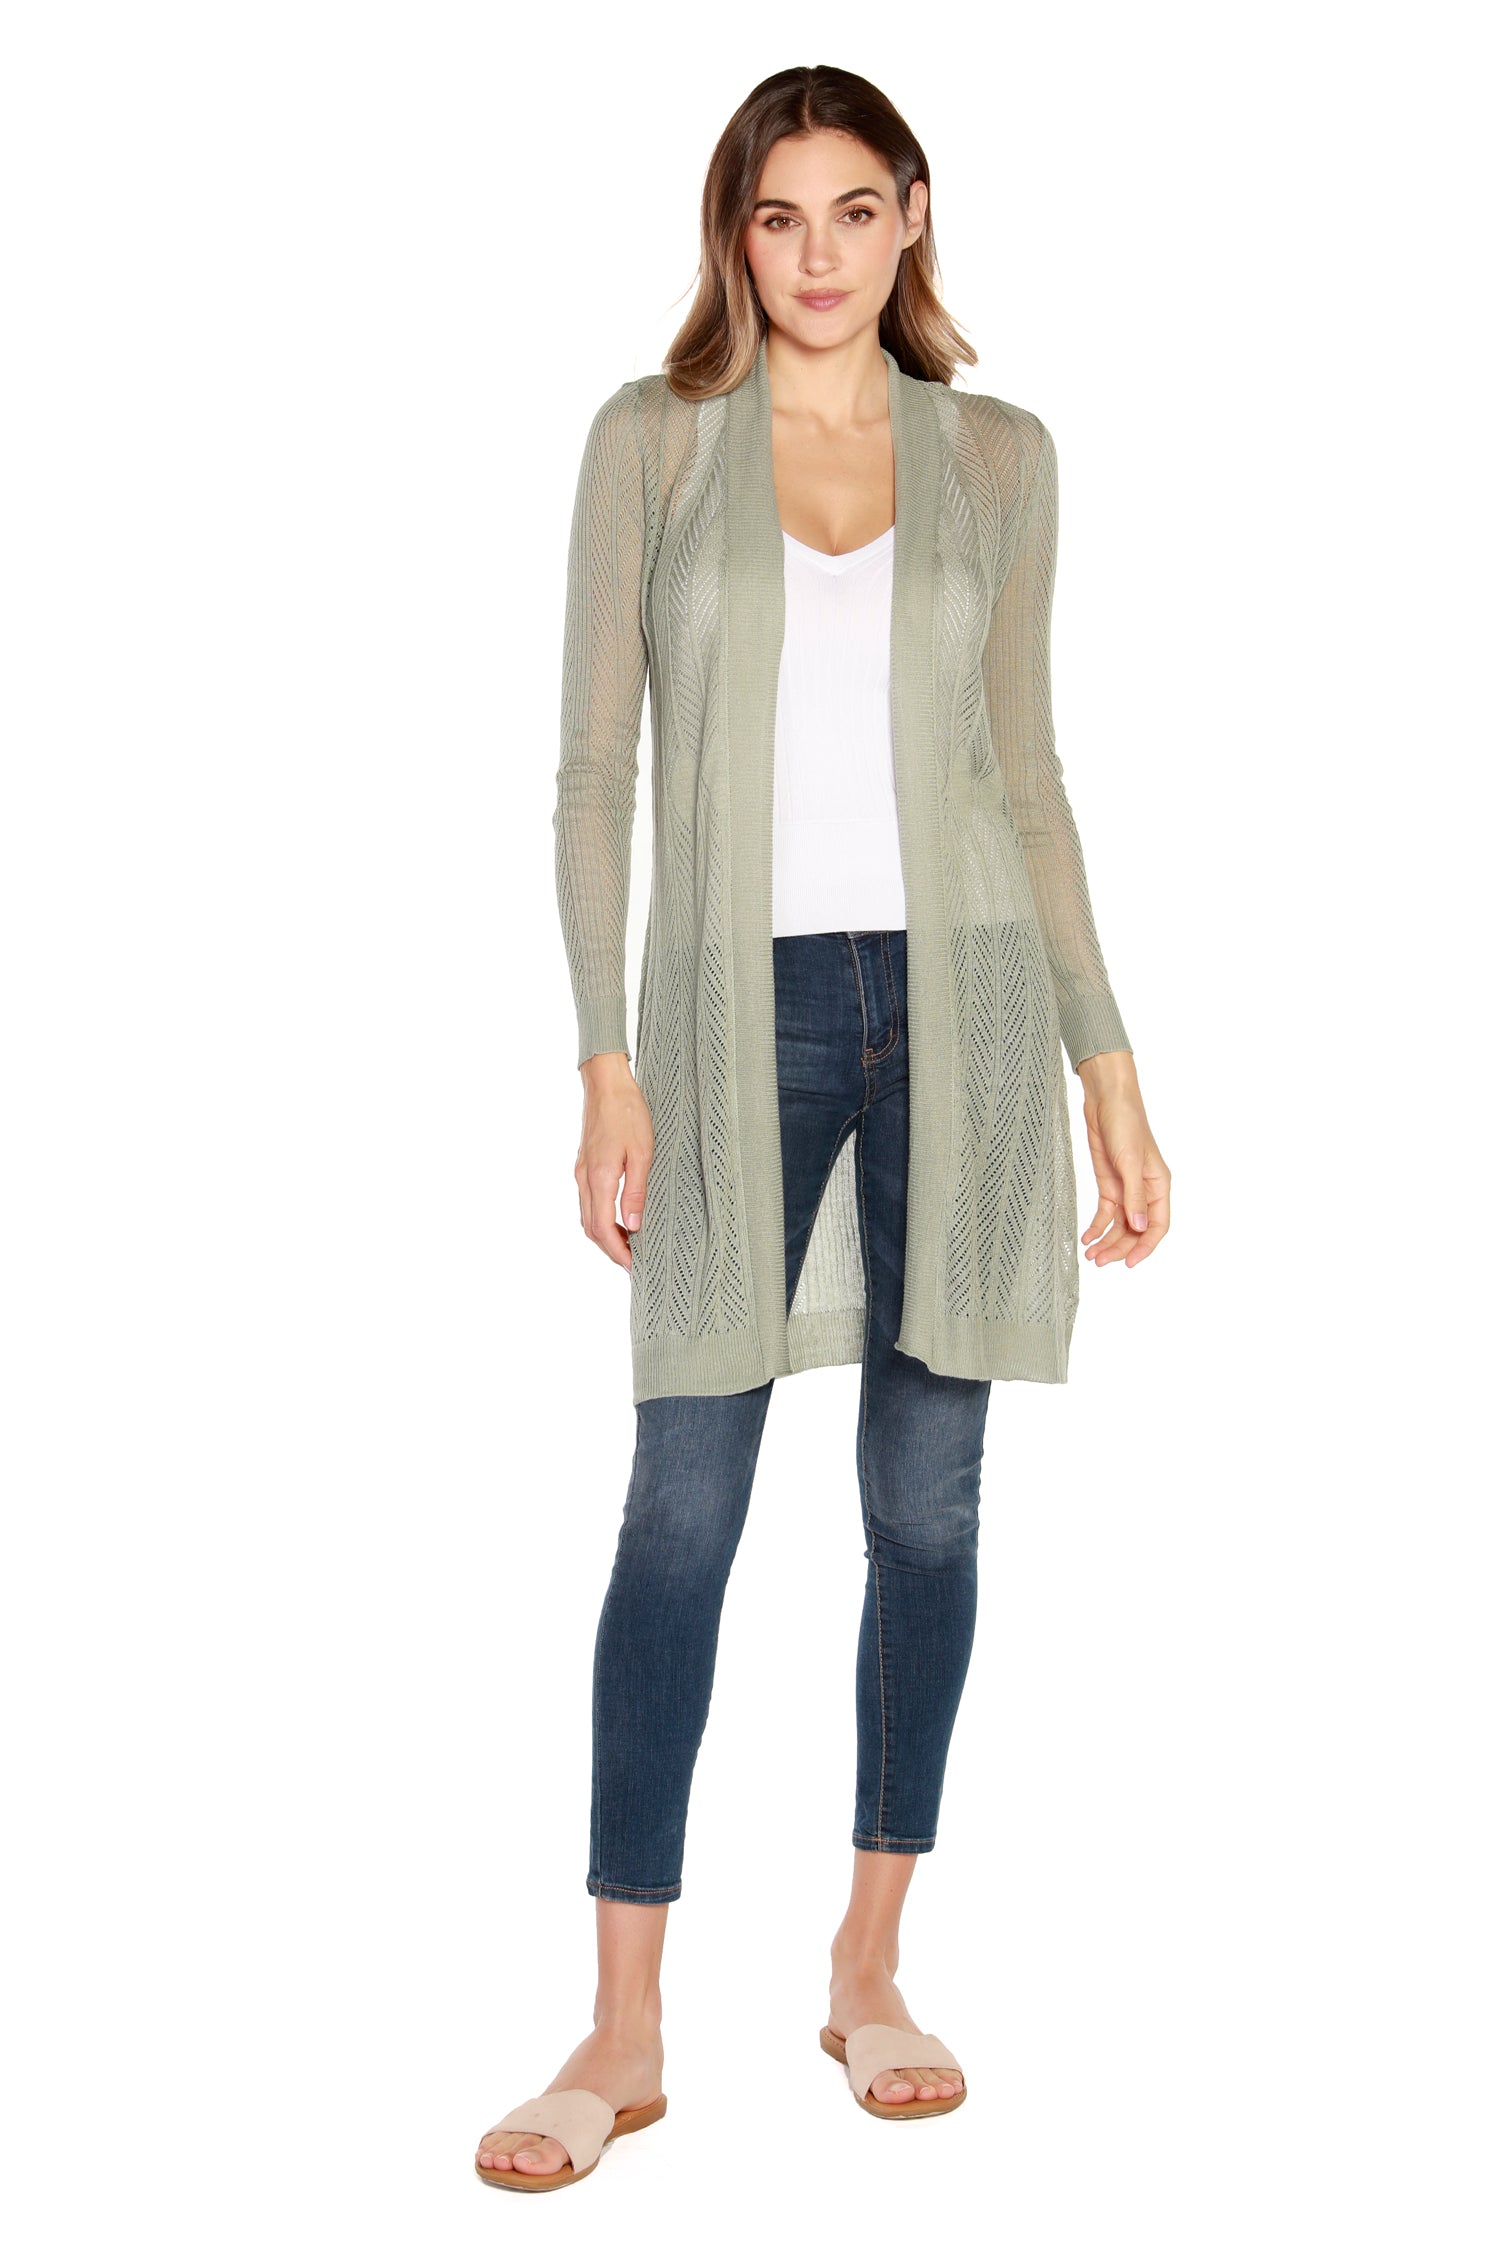 Women’s Sheer Long Cardigan with Crochet Chevron Stripes and Pointelle Stitch